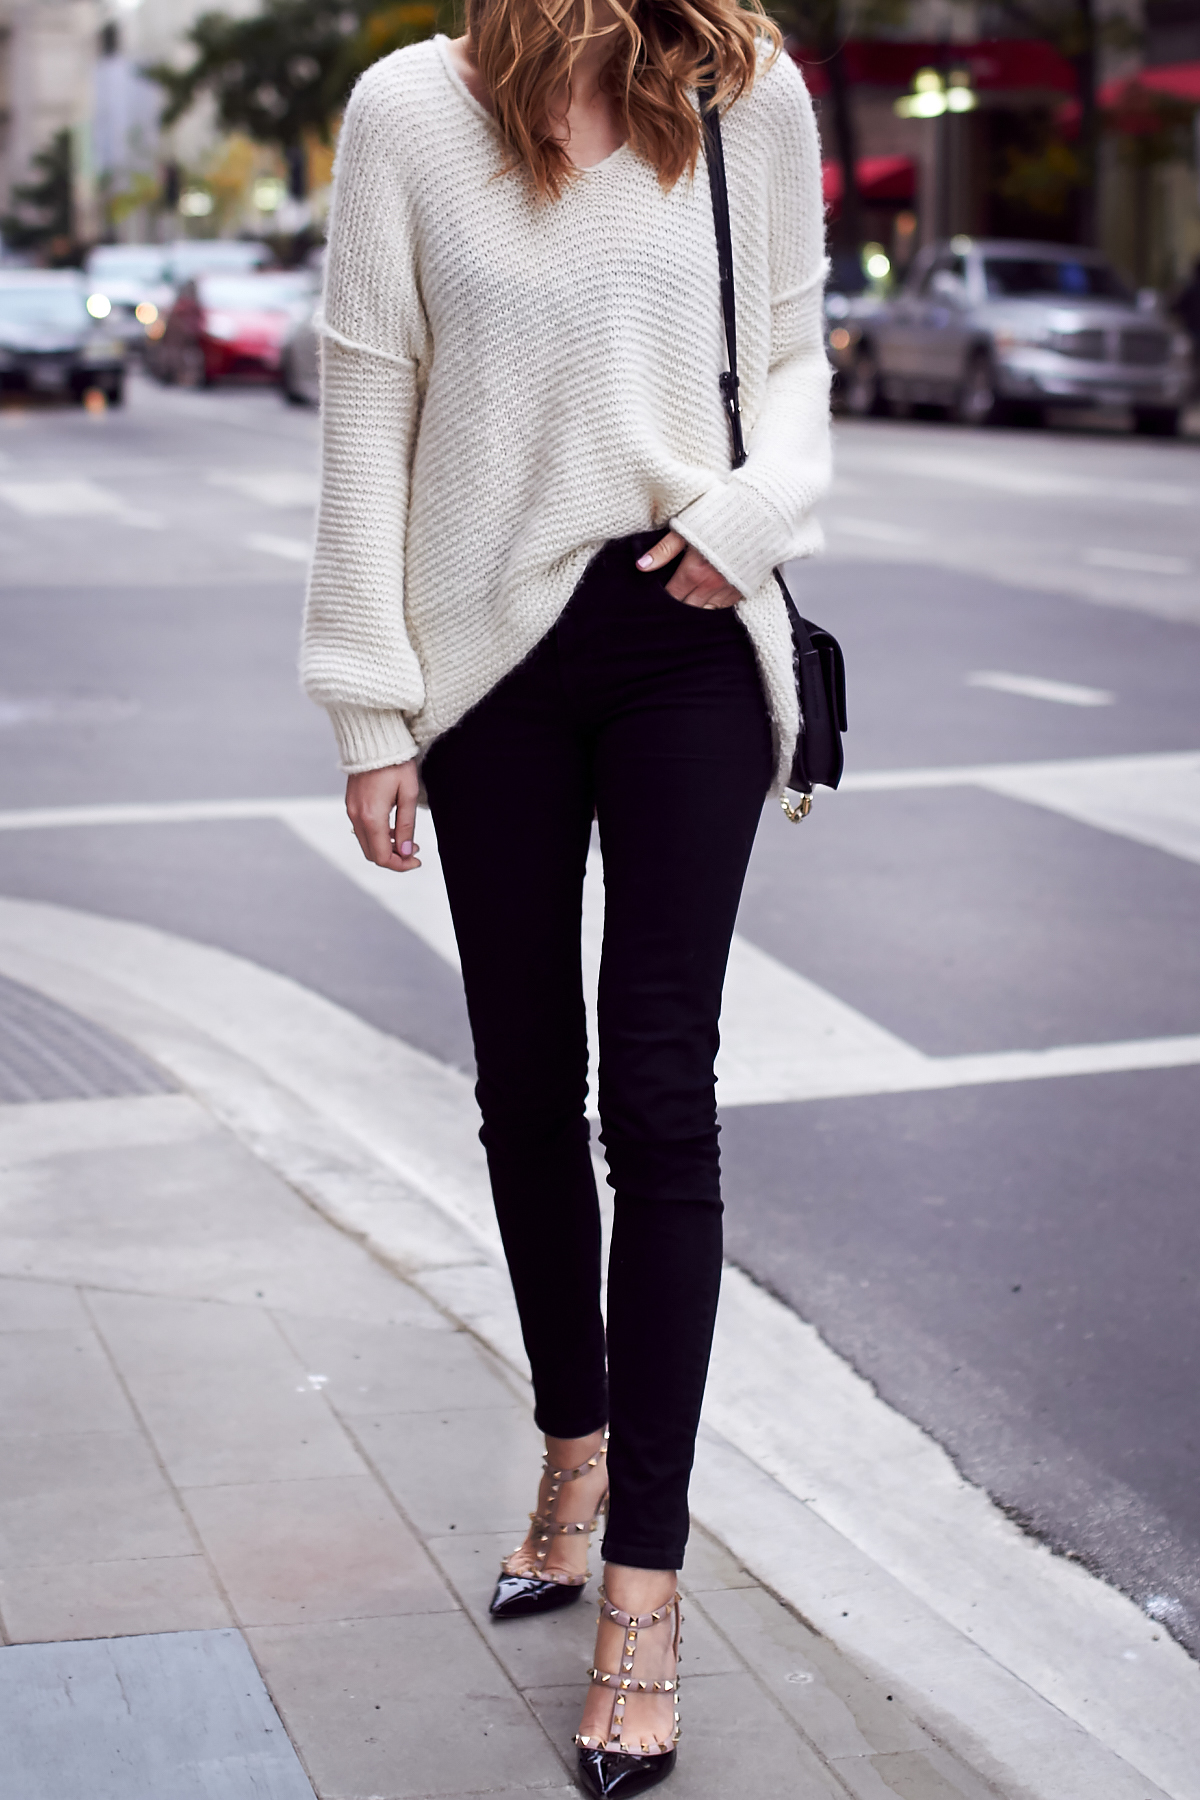 Fall Outfit, Winter Outfit, Ivory Sweater, Black Skinny Jeans, Chloe Faye Handbag, Valentino Rockstud Pumps